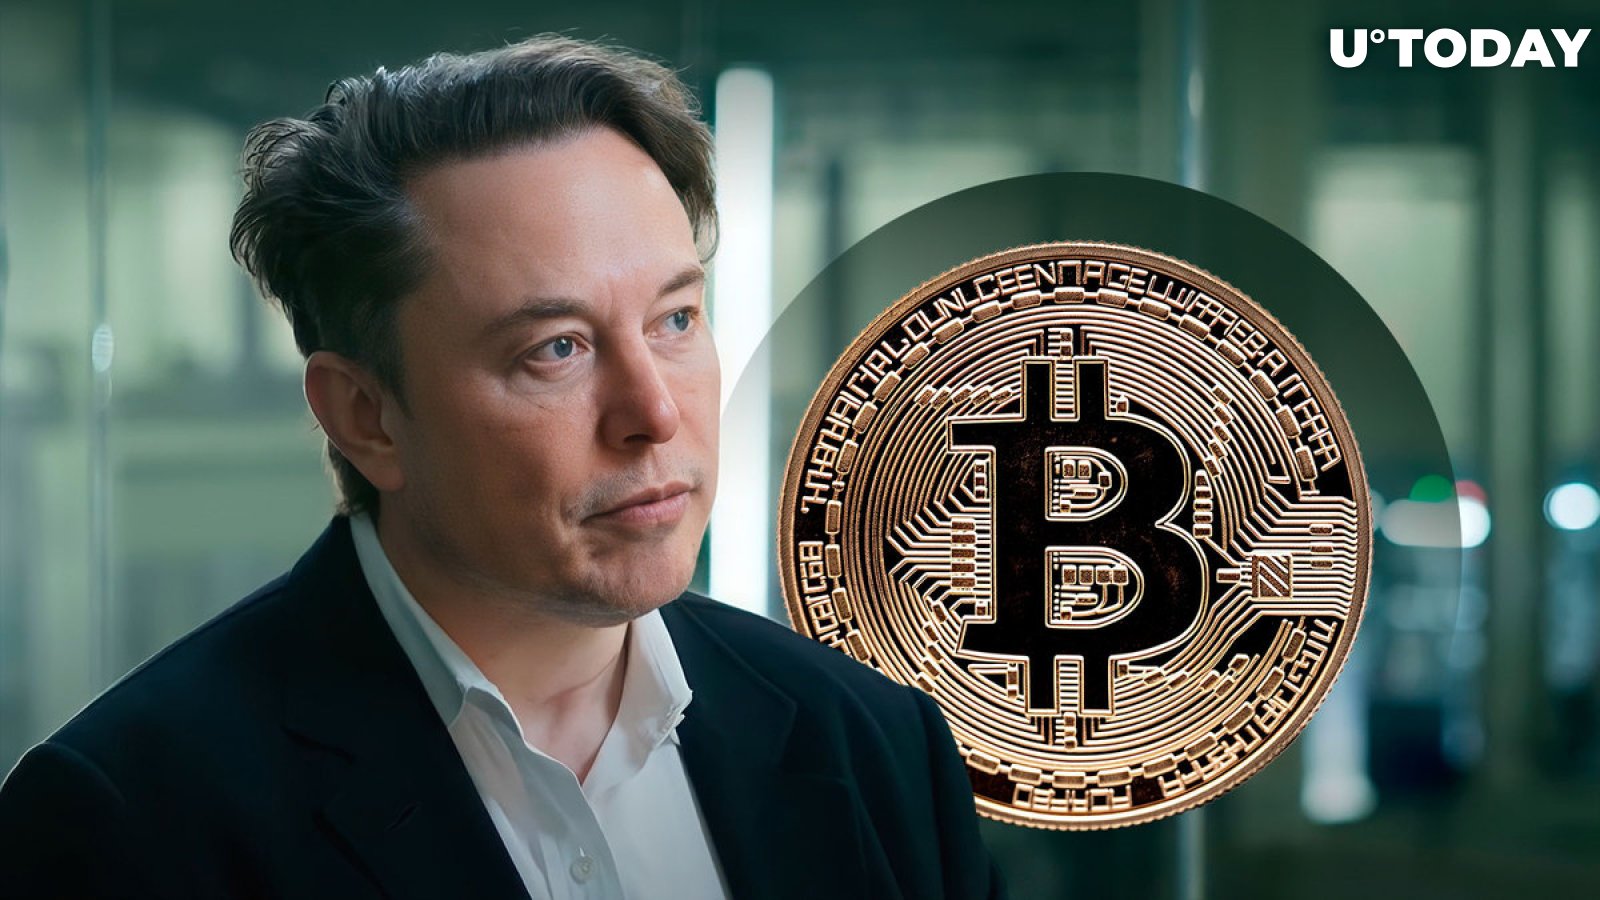 Bitcoin and Elon Musk Have This Stunning Thing In Common: VanEck's Top Exec